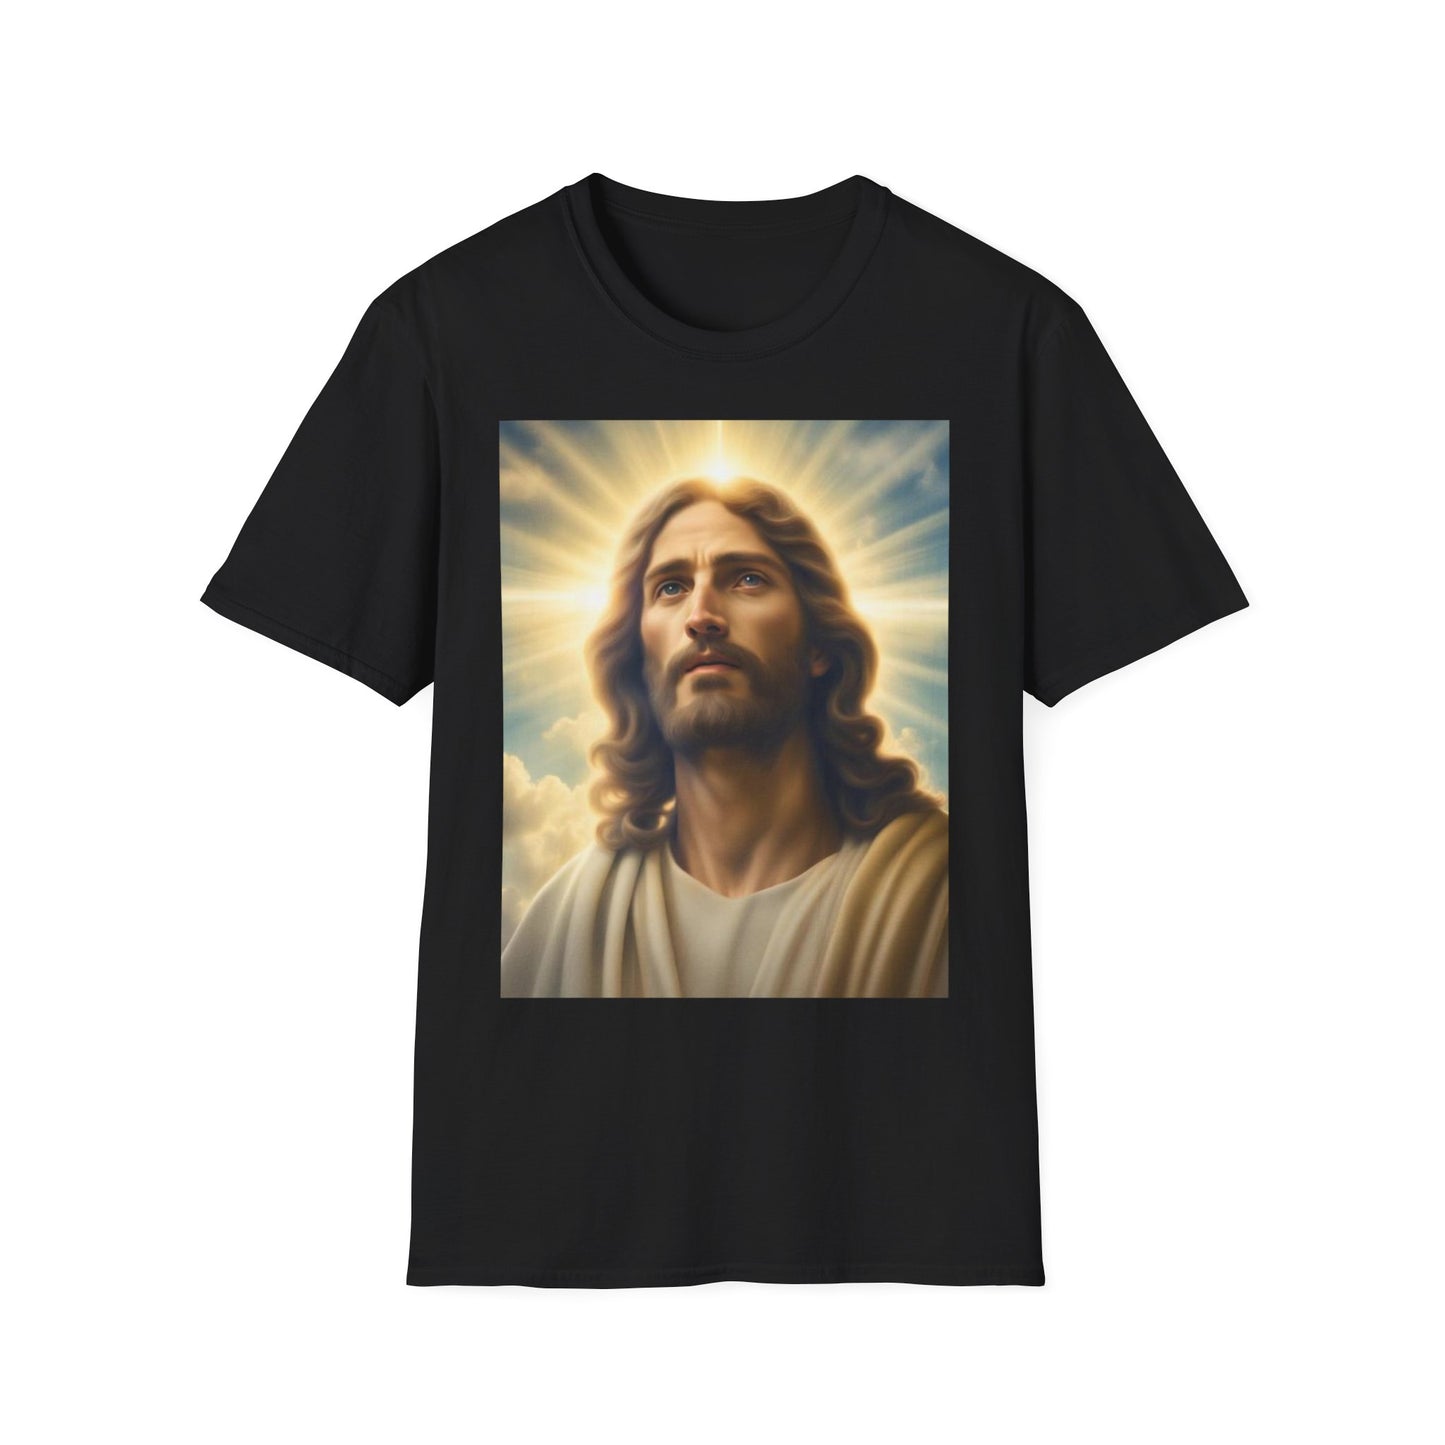 A black t-shirt with a design of Jesus Christ looking to heaven. There is a heavenly light shining out from behind him.